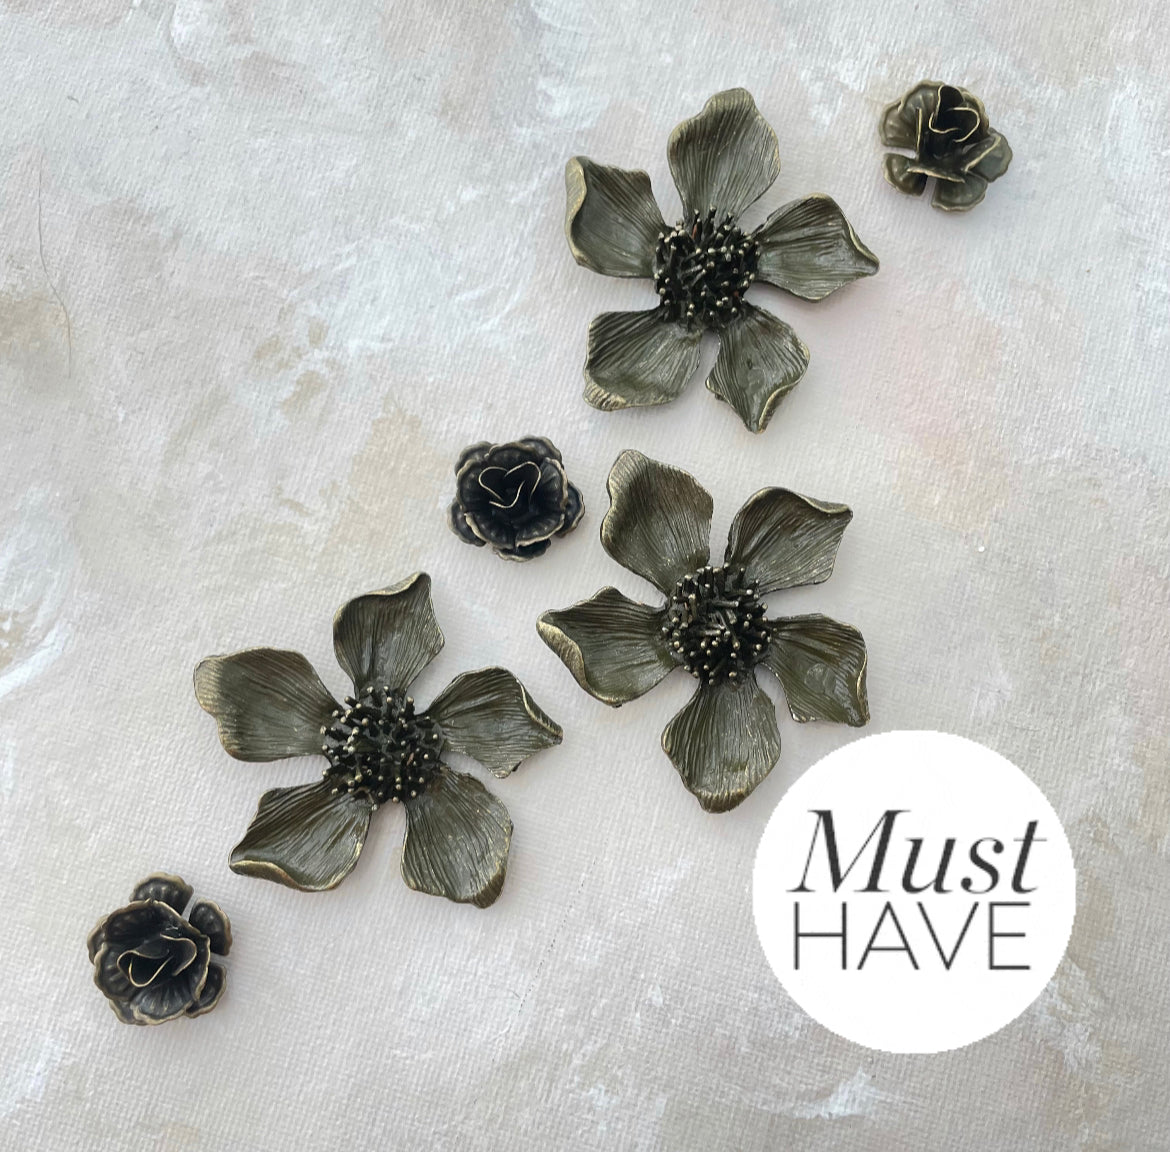  Three large Metal styling flowers and three small metal styling flowers, flowers have a  Brown Finish with touches of gold must have styling props from Champagne & GRIT